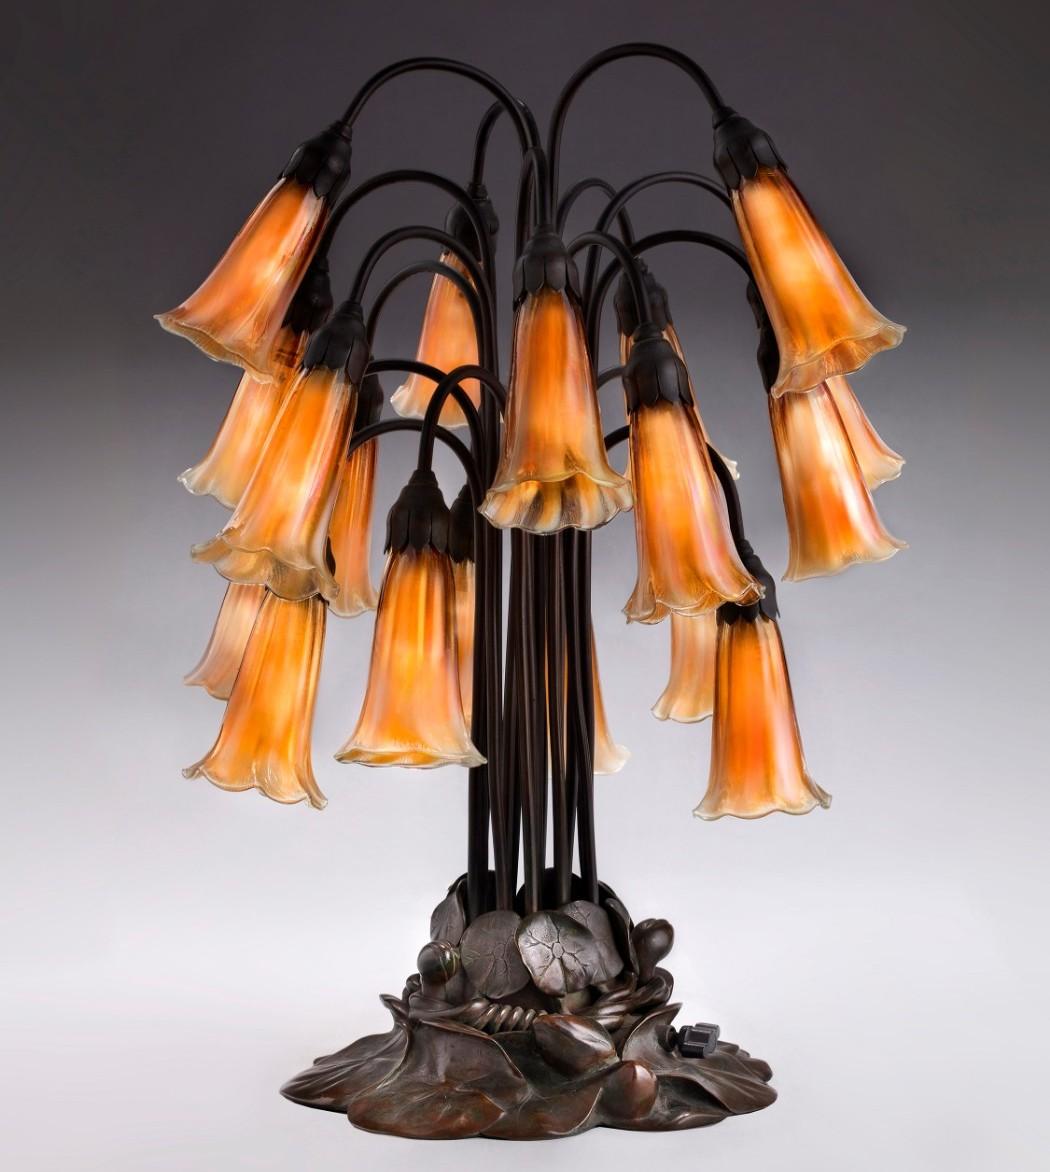 Louis Comfort Tiffany: Treasures from the Driehaus Collection